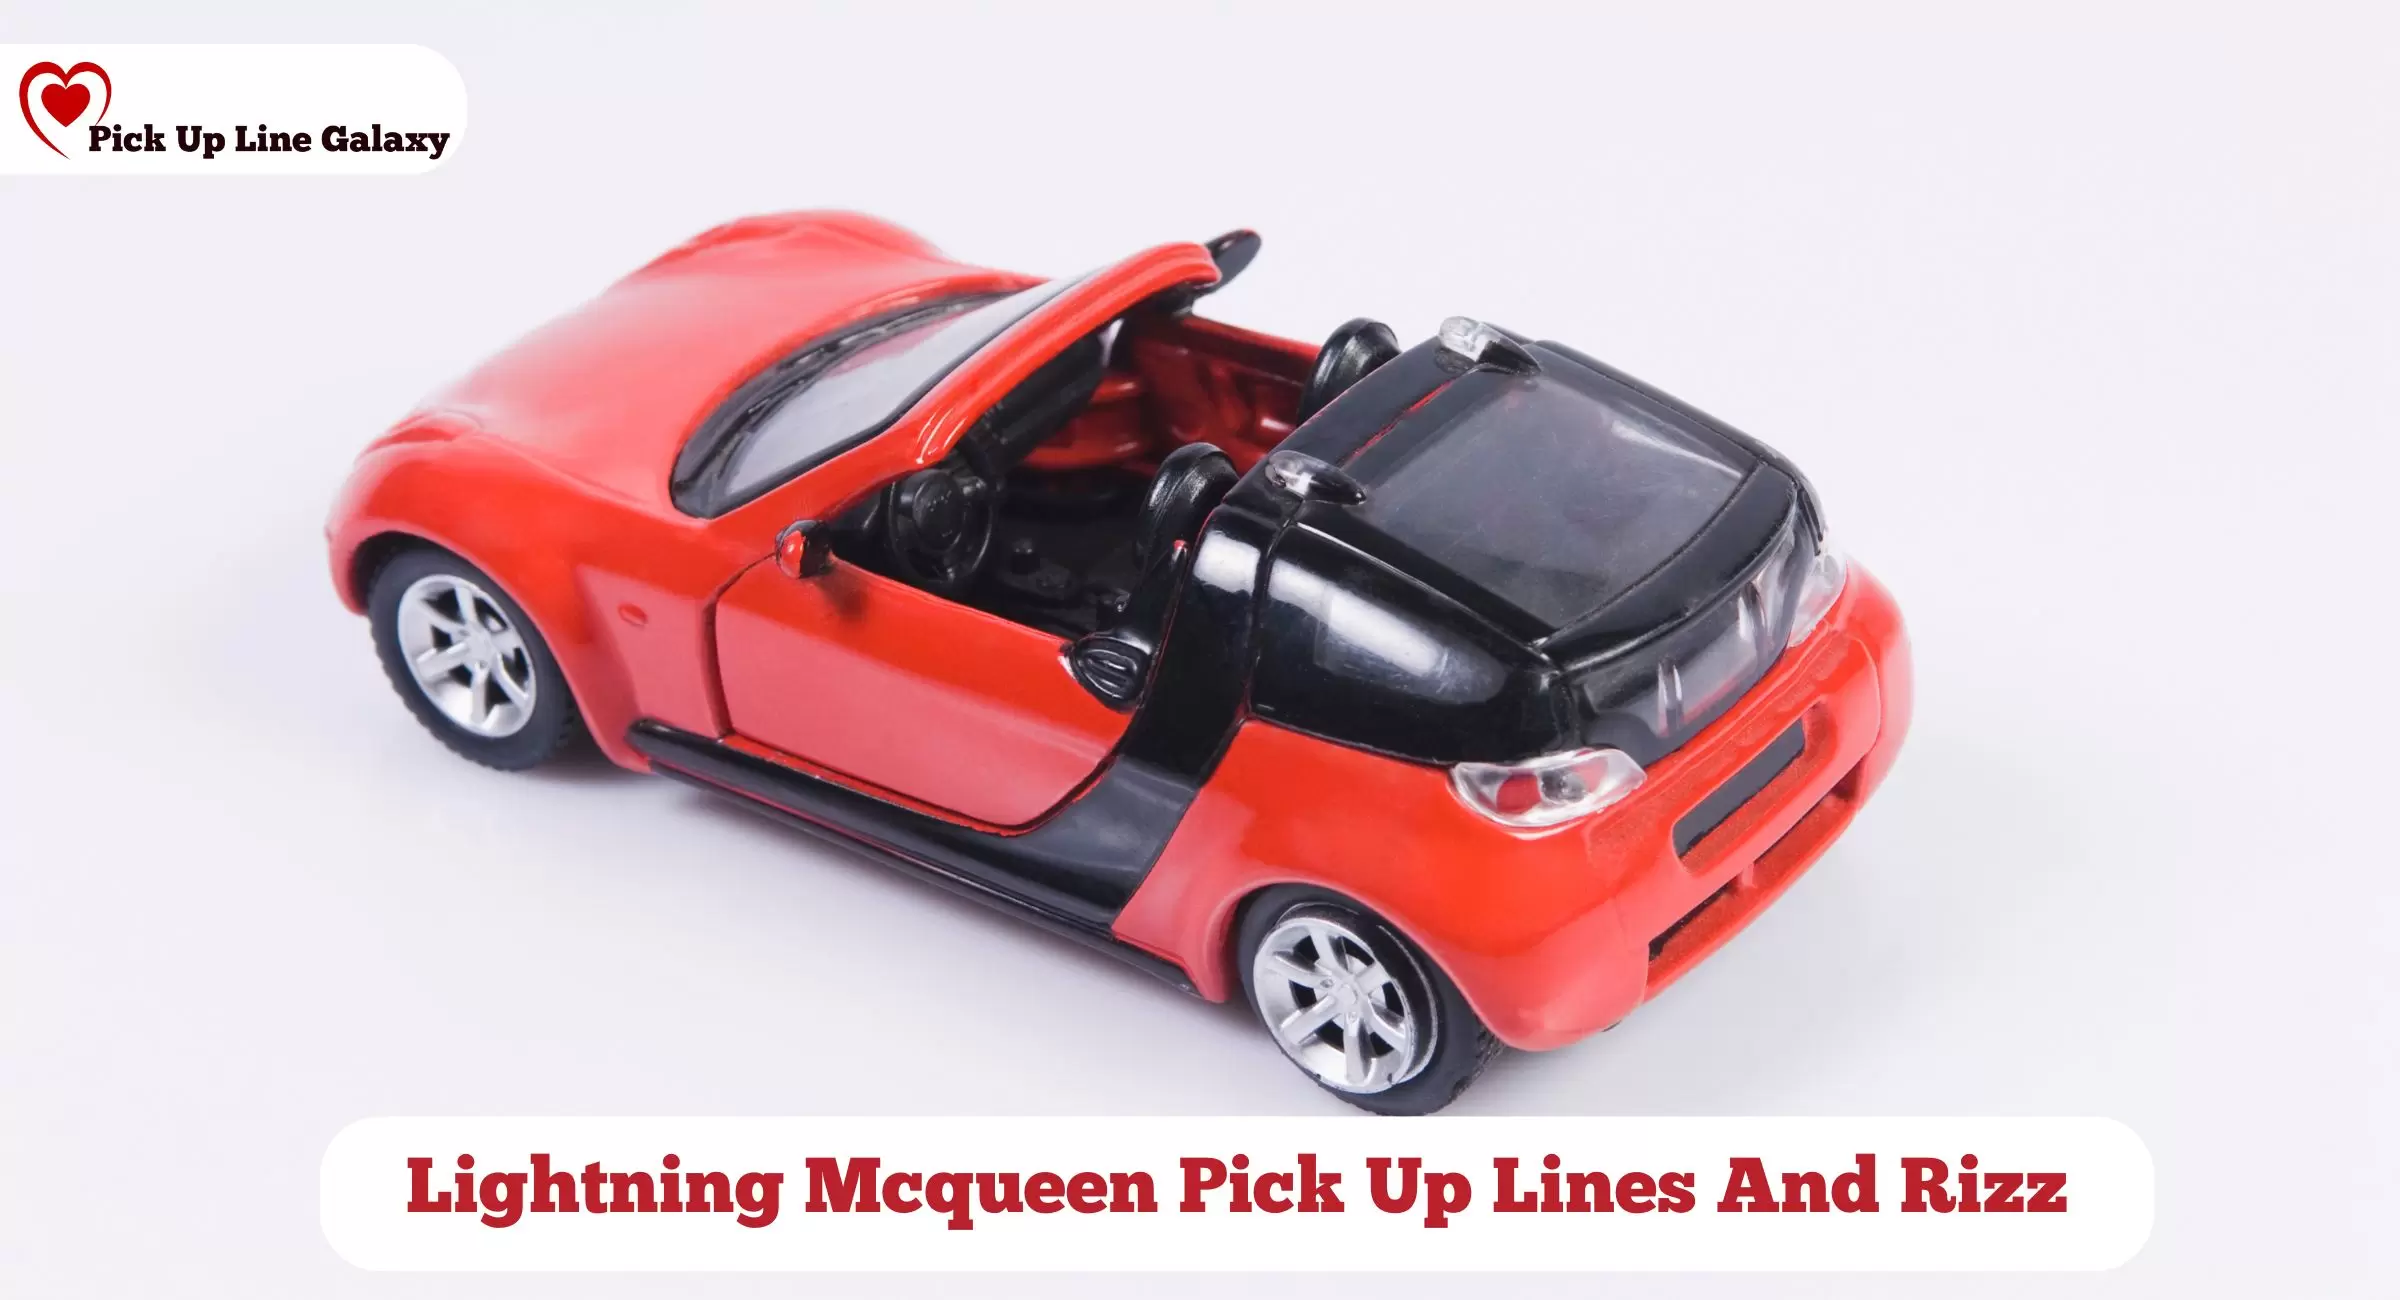 Lightning Mcqueen Pick Up Lines And Rizz